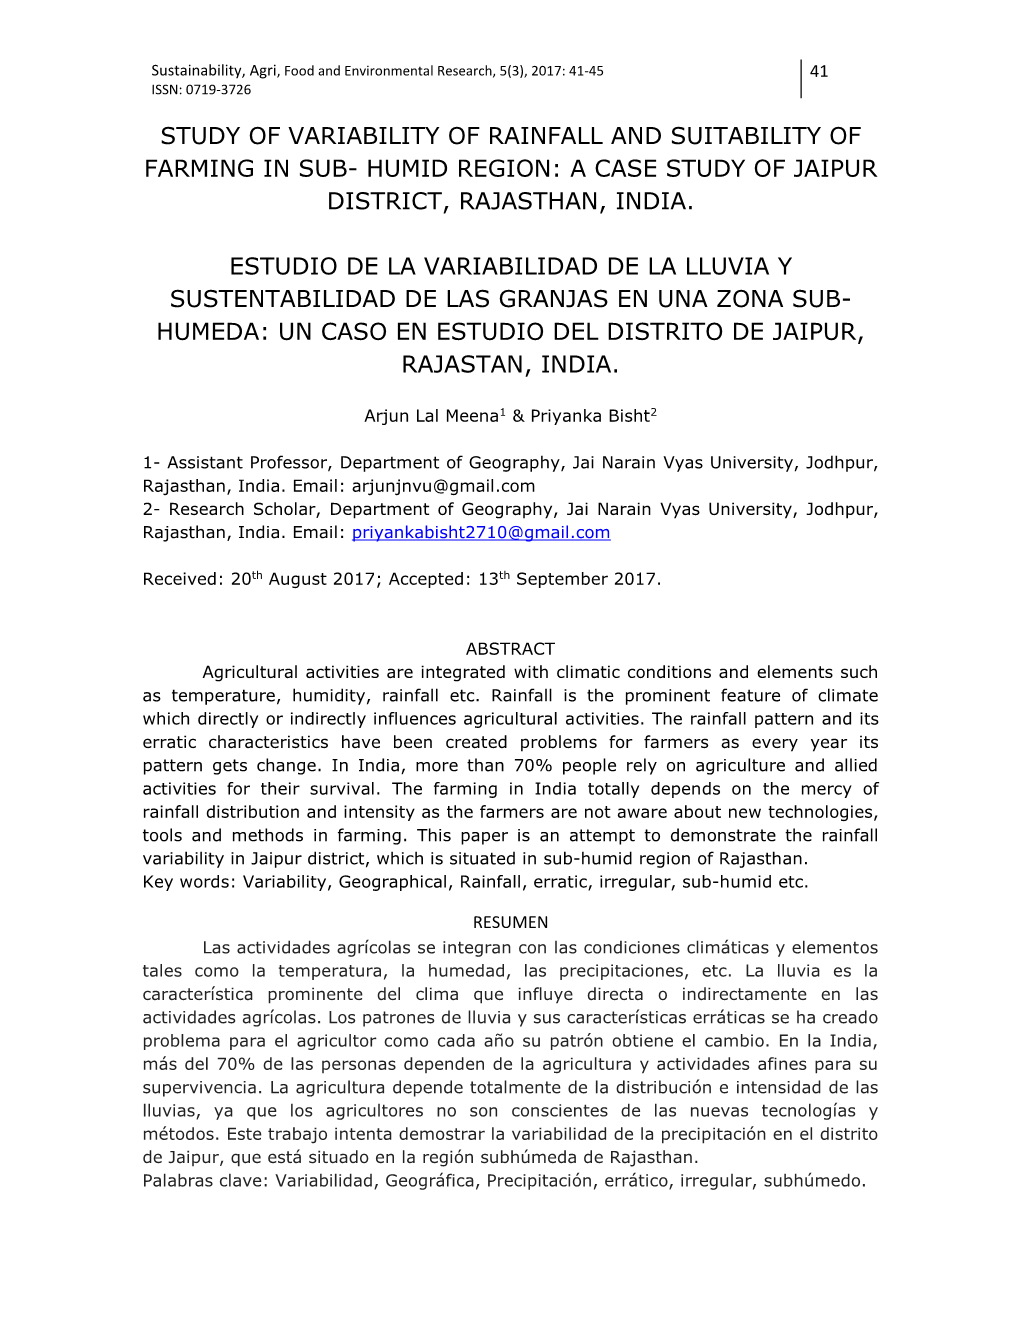 Study of Variability of Rainfall and Suitability of Farming in Sub- Humid Region: a Case Study of Jaipur District, Rajasthan, India